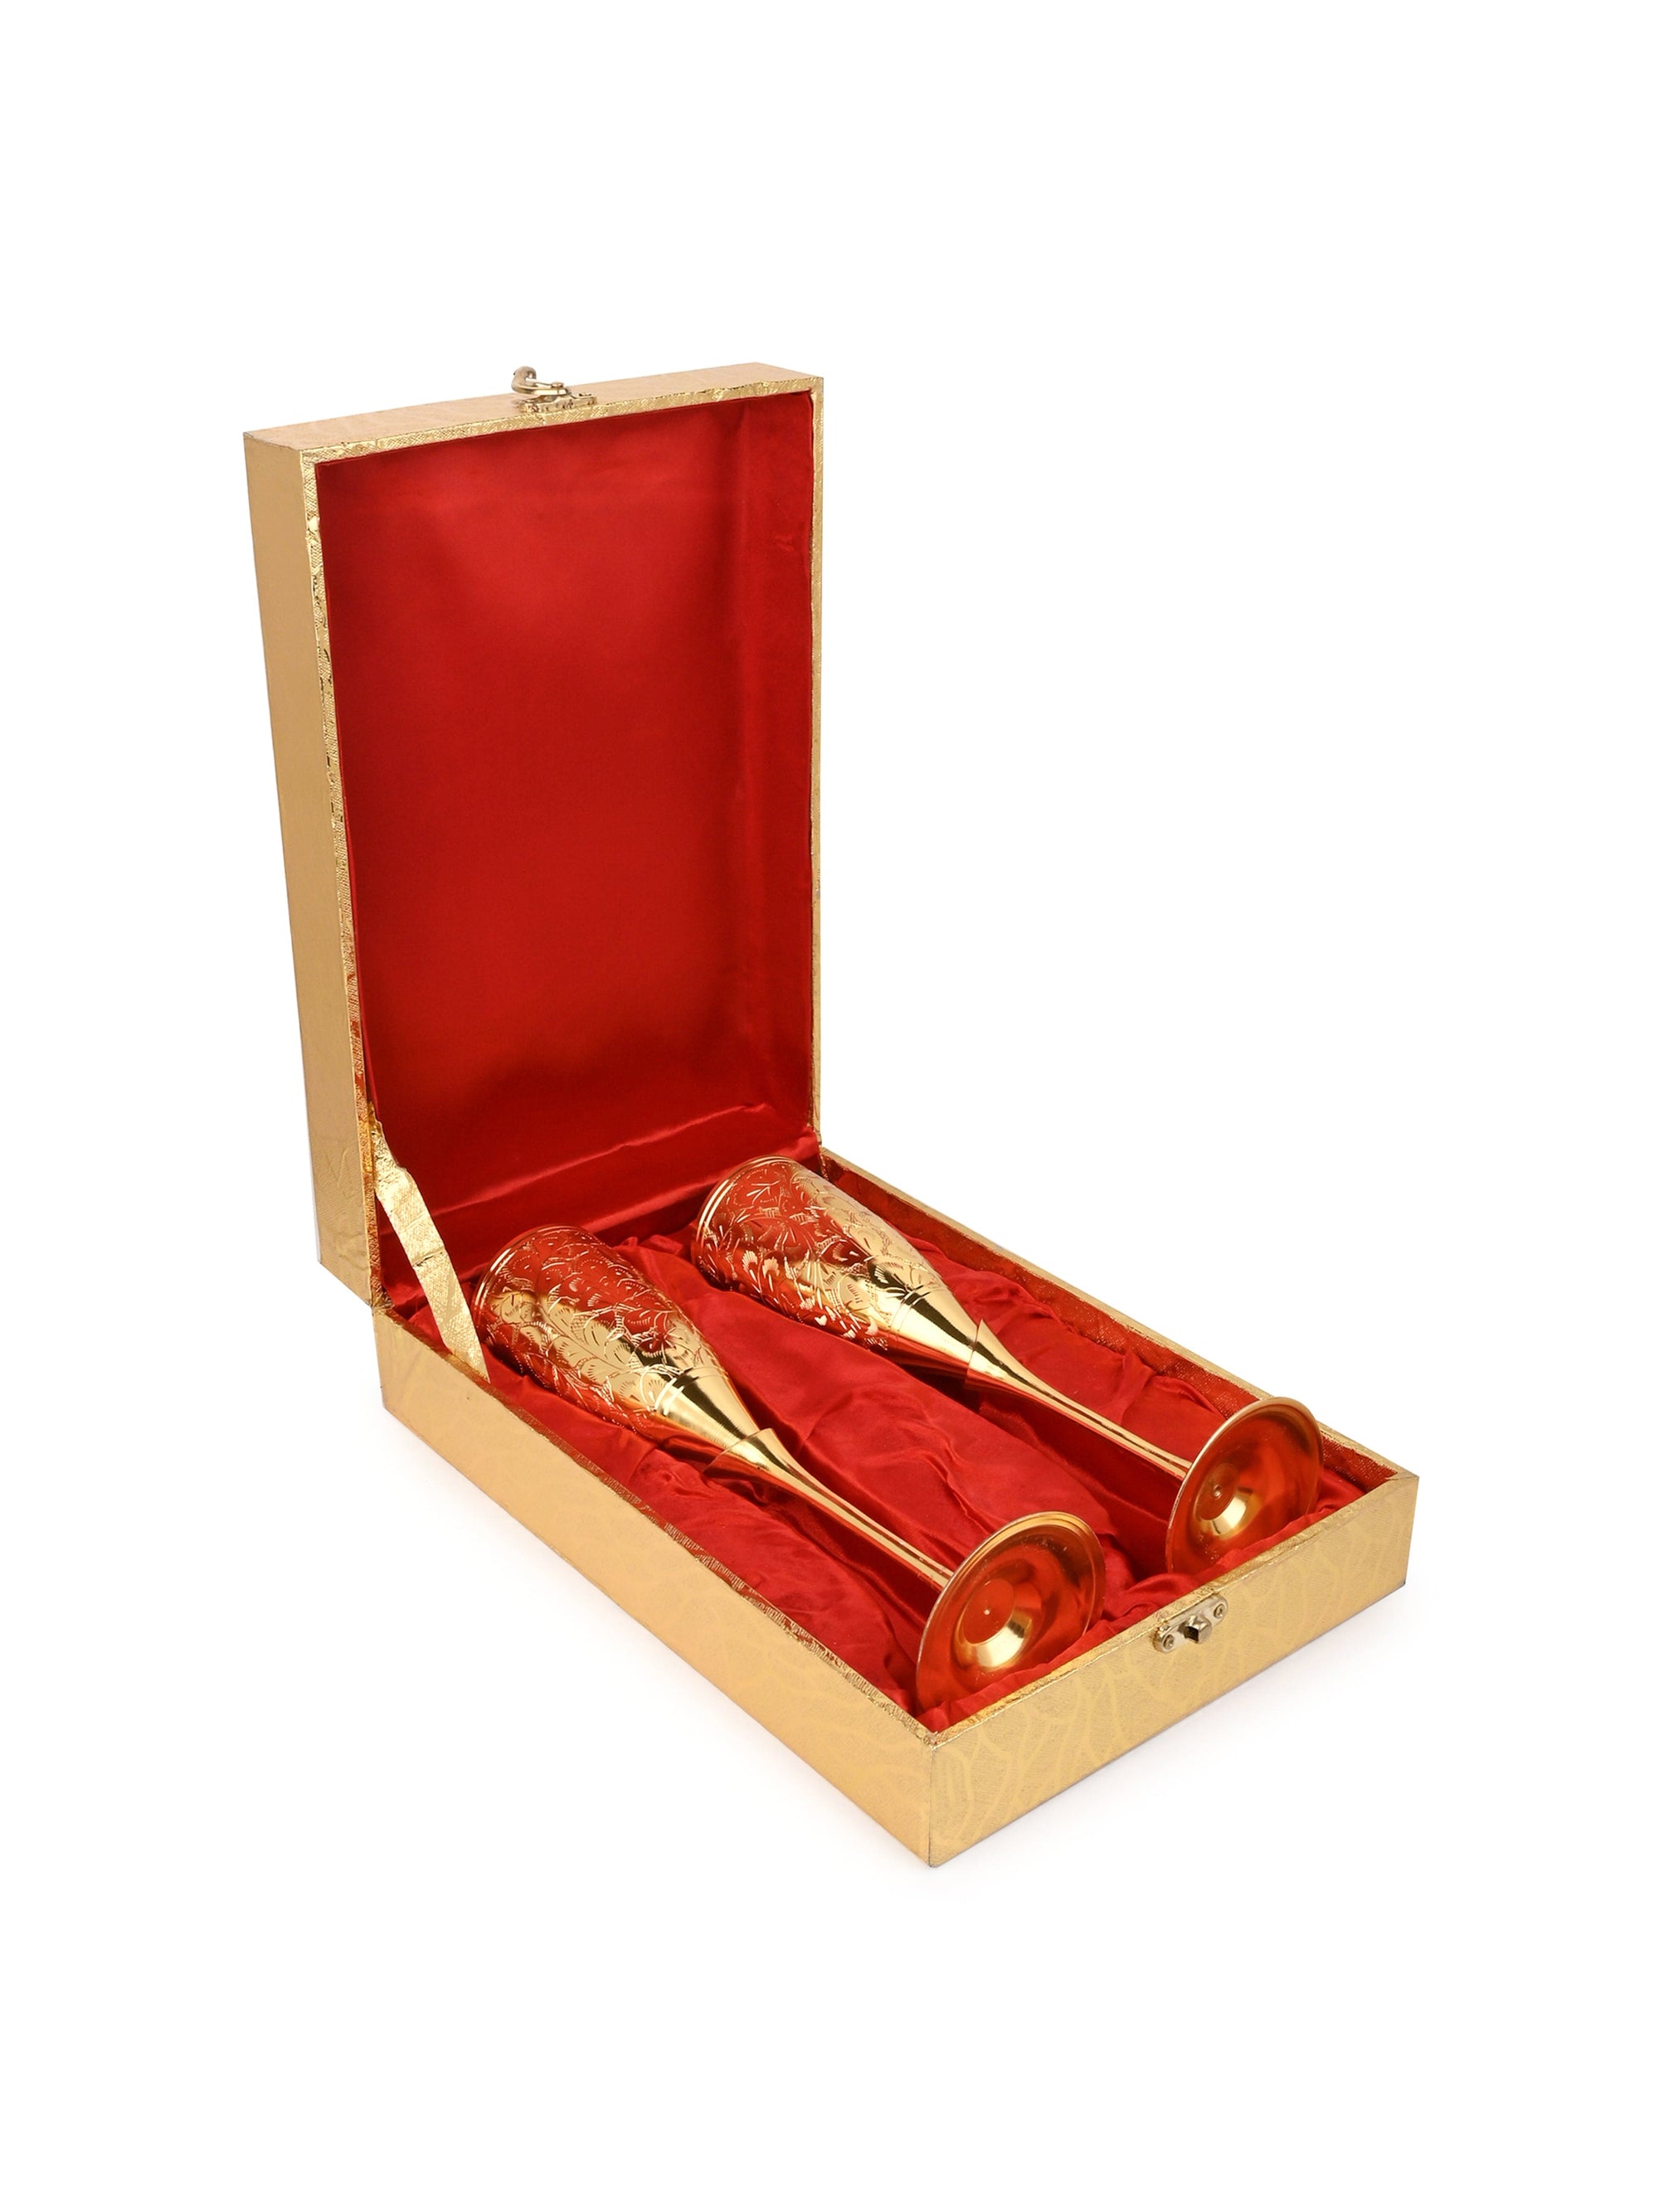 Brass Crafted Champagne Glass - Set of 2 in a Red Velvet Gift Box